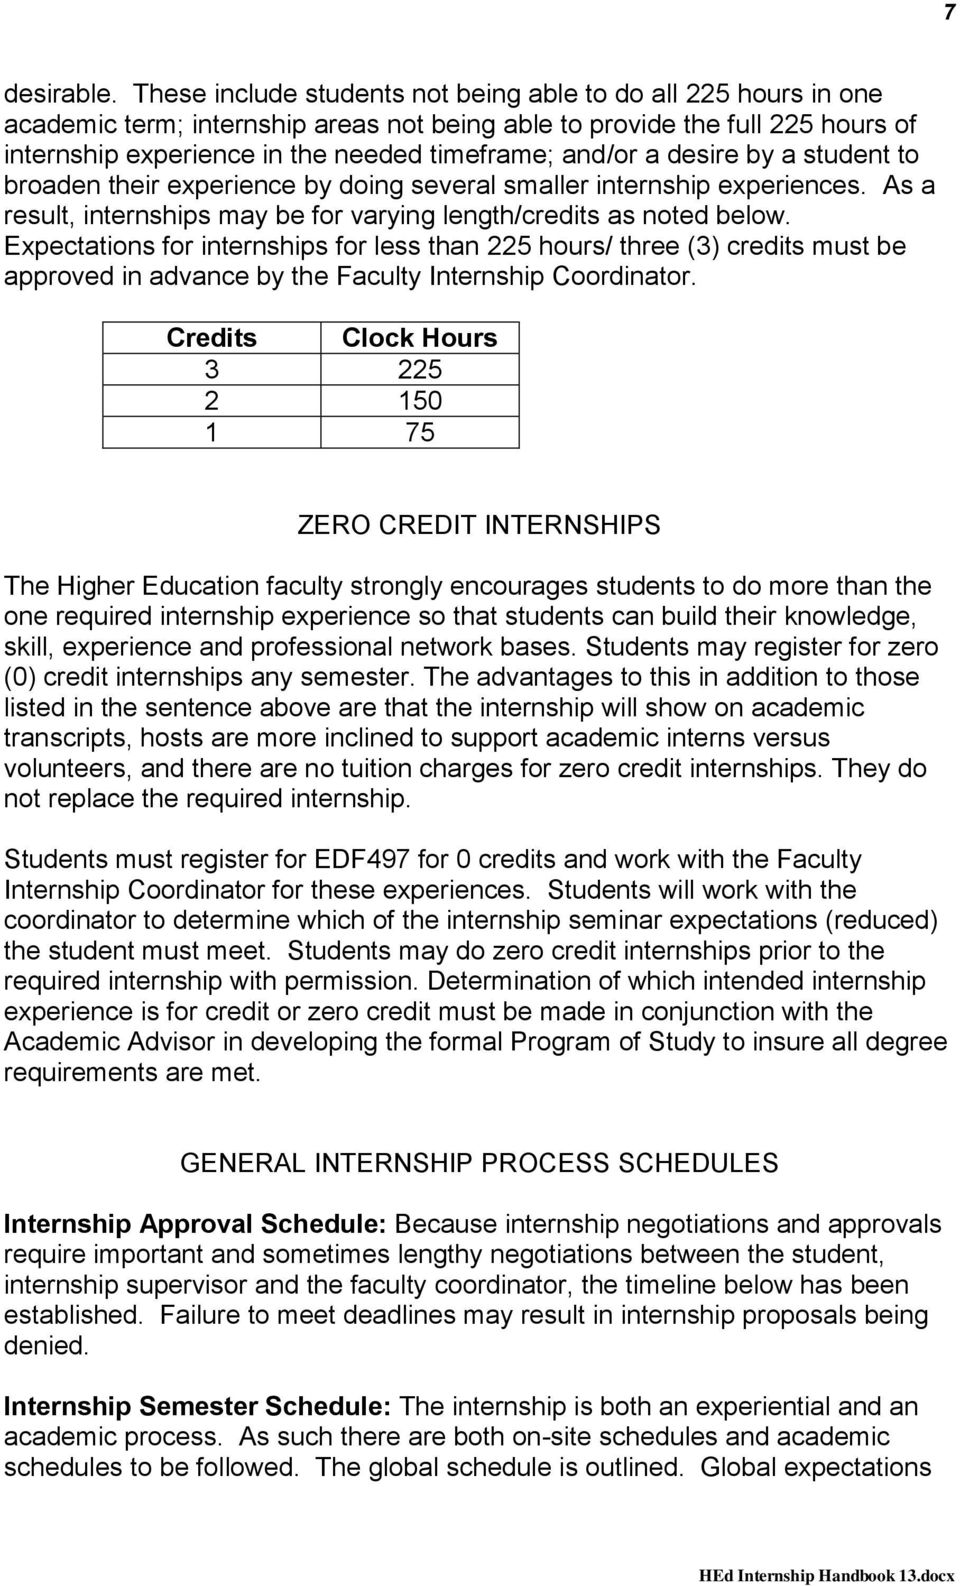 a desire by a student to broaden their experience by doing several smaller internship experiences. As a result, internships may be for varying length/credits as noted below.